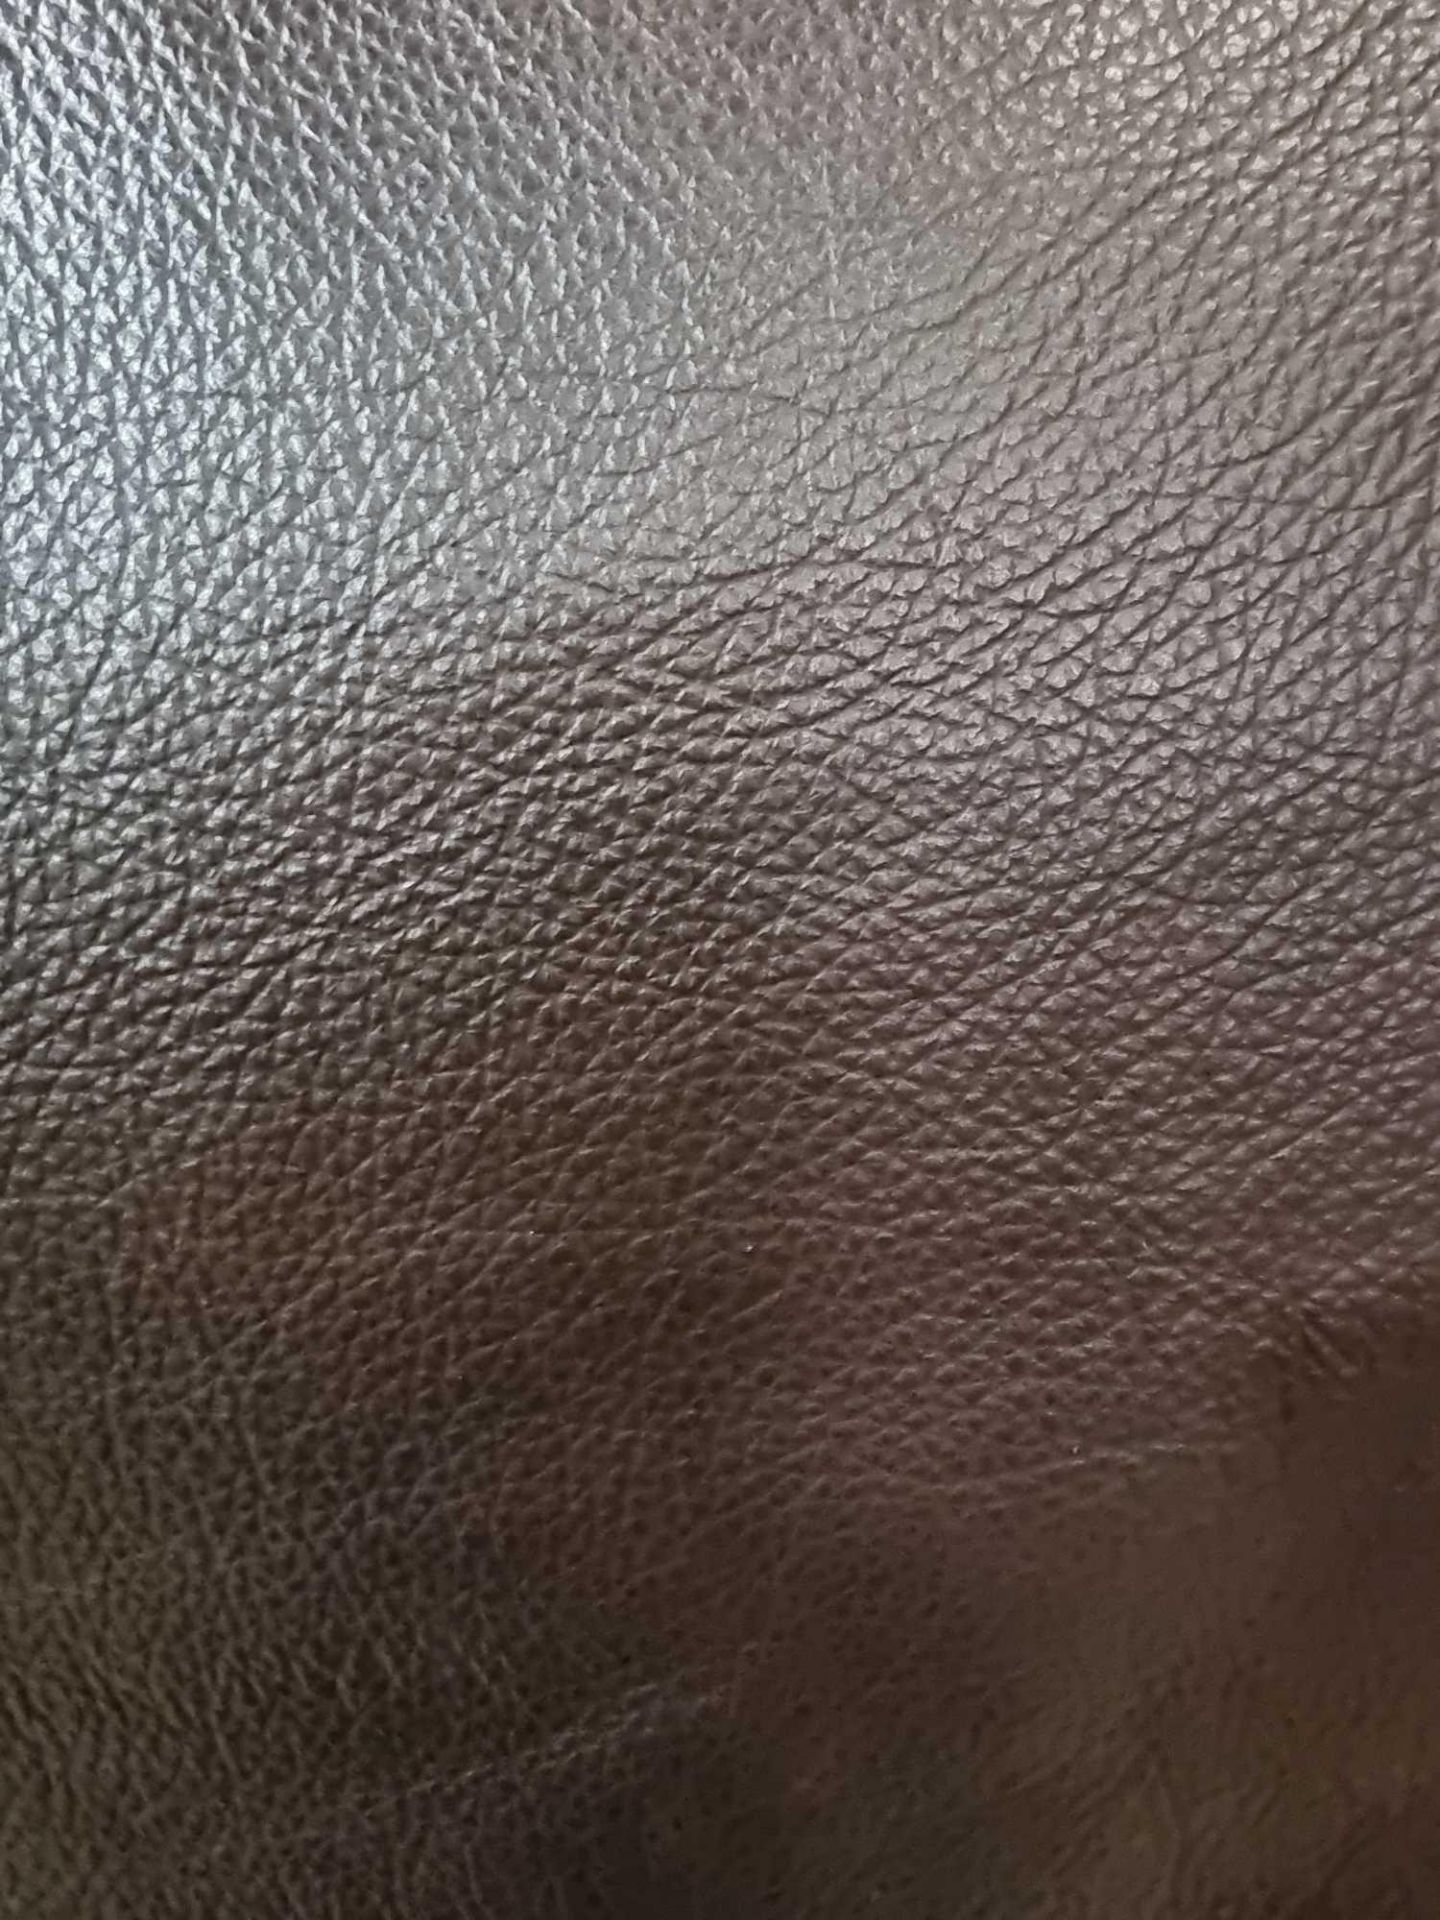 Mastrotto Hudson Chocolate Leather Hide approximately 4.94mÂ² 2.6 x 1.9cm